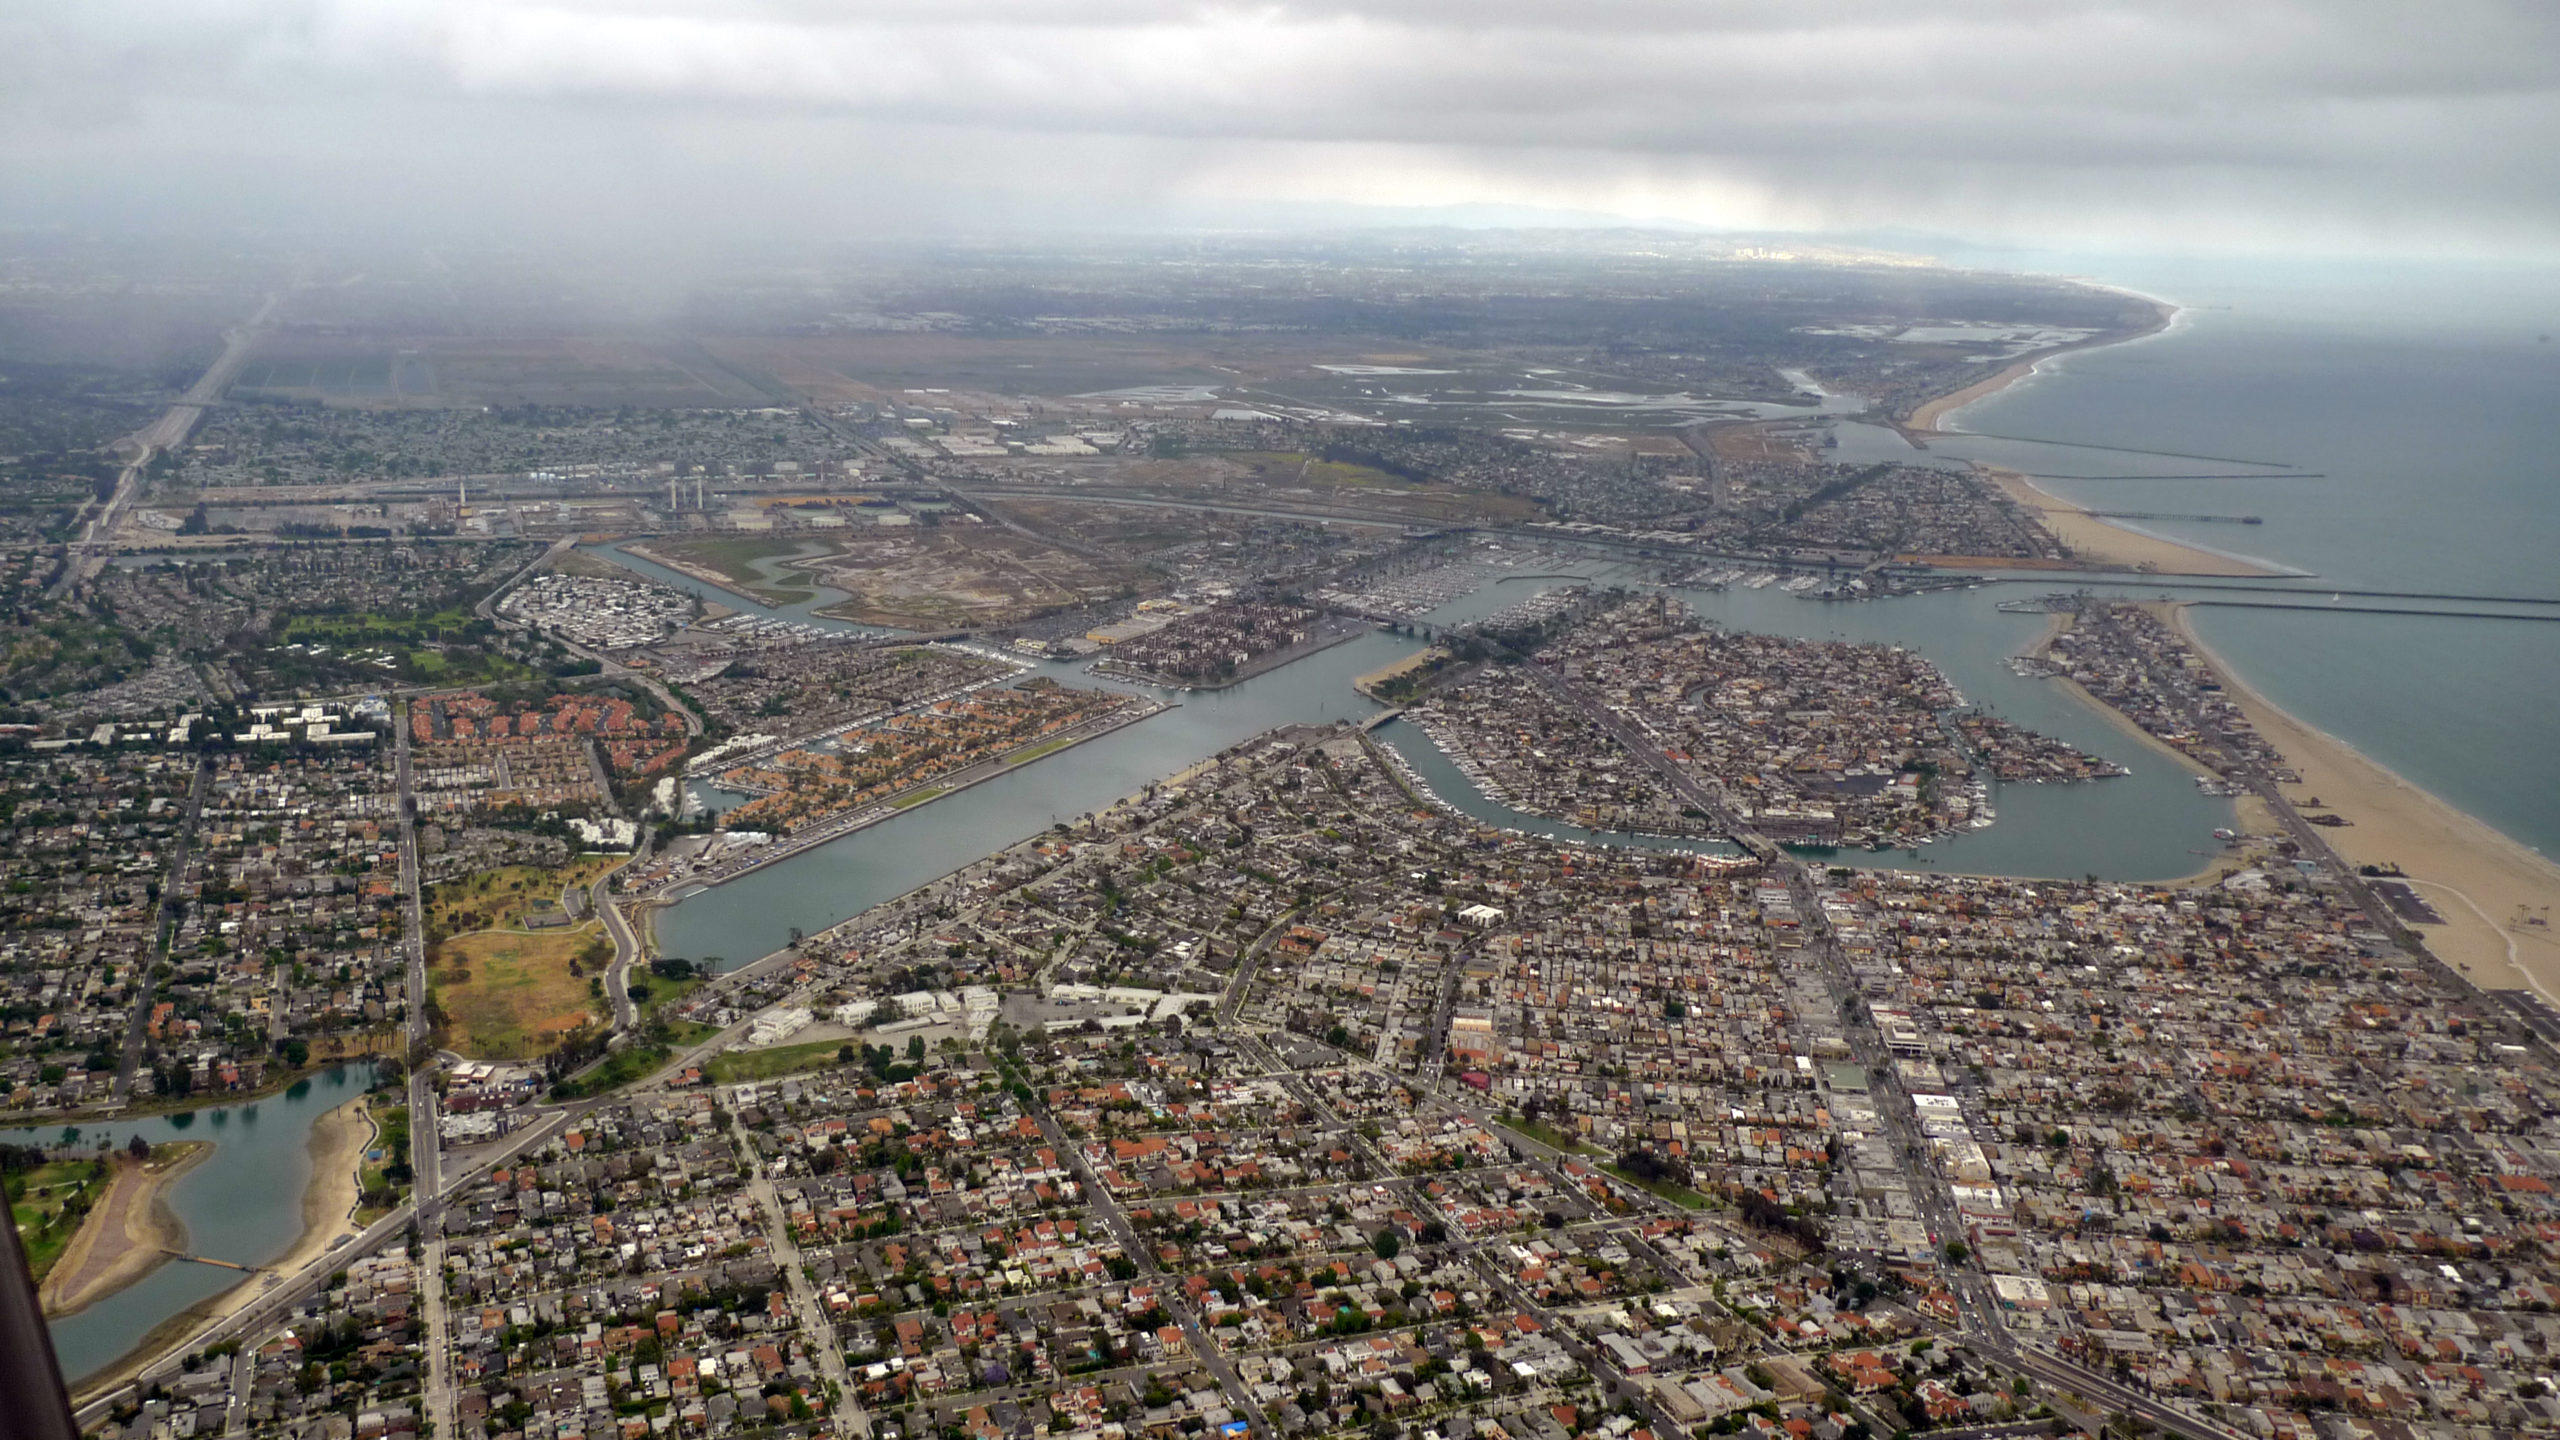 Aerial view of a coastline, including Alamitos Bay, on a cloudy day.